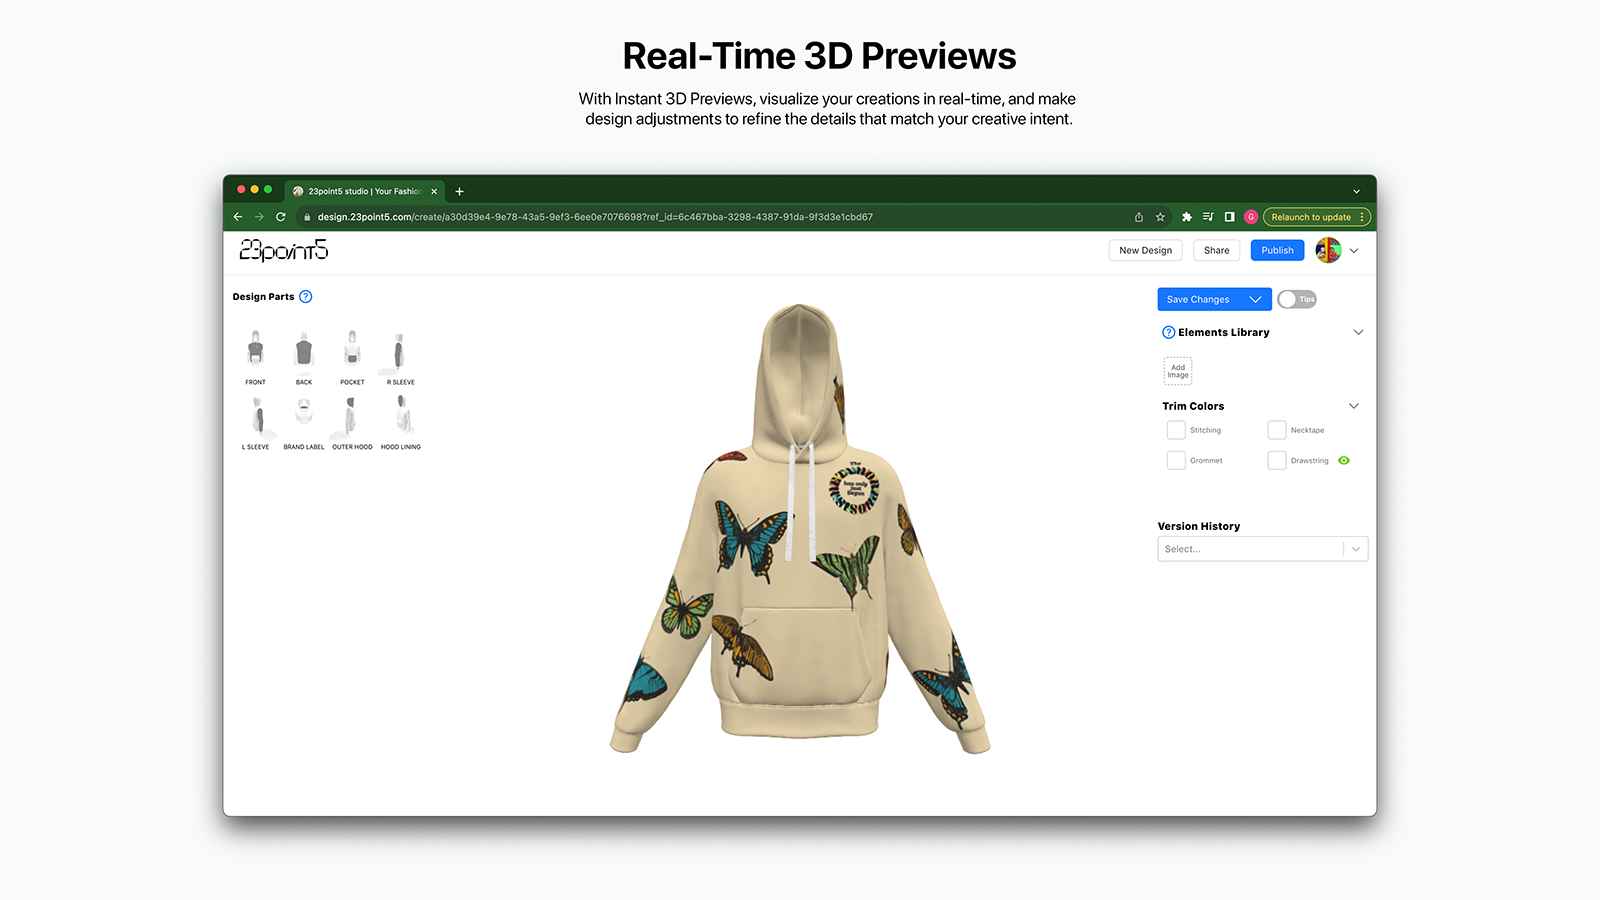 Real-Time 3D previews